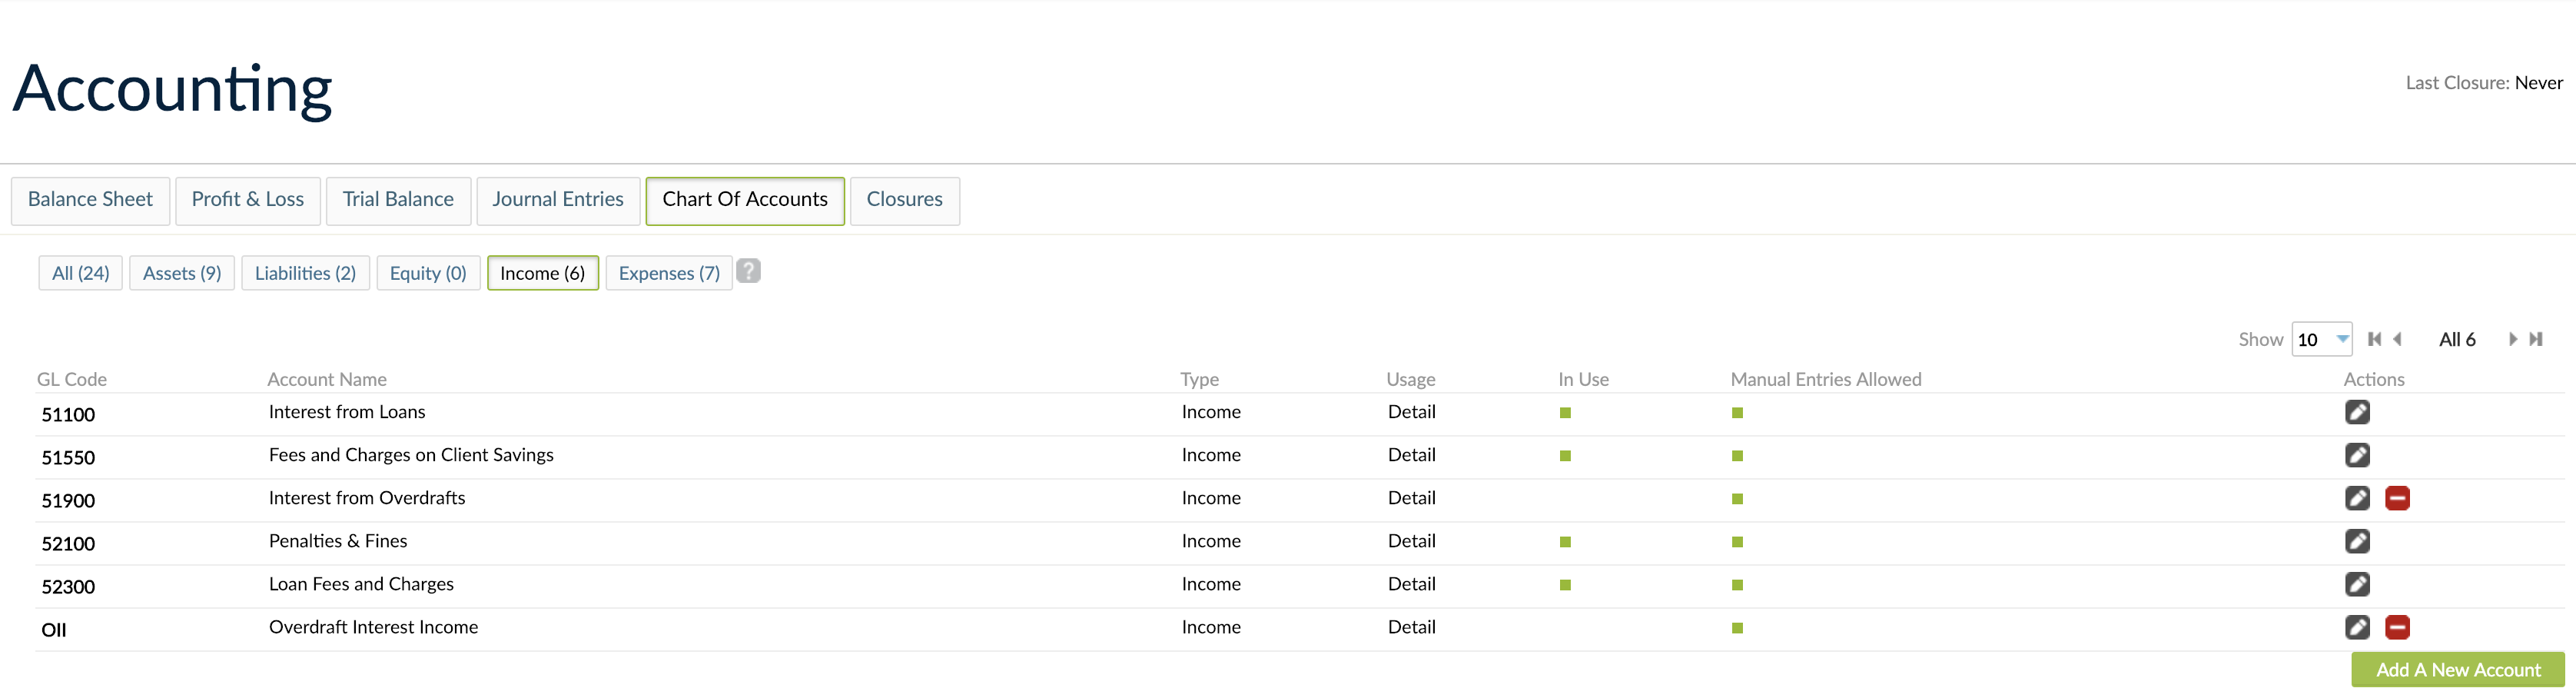 Chart of Accounts tab - Income Tab - Add a New Account button.